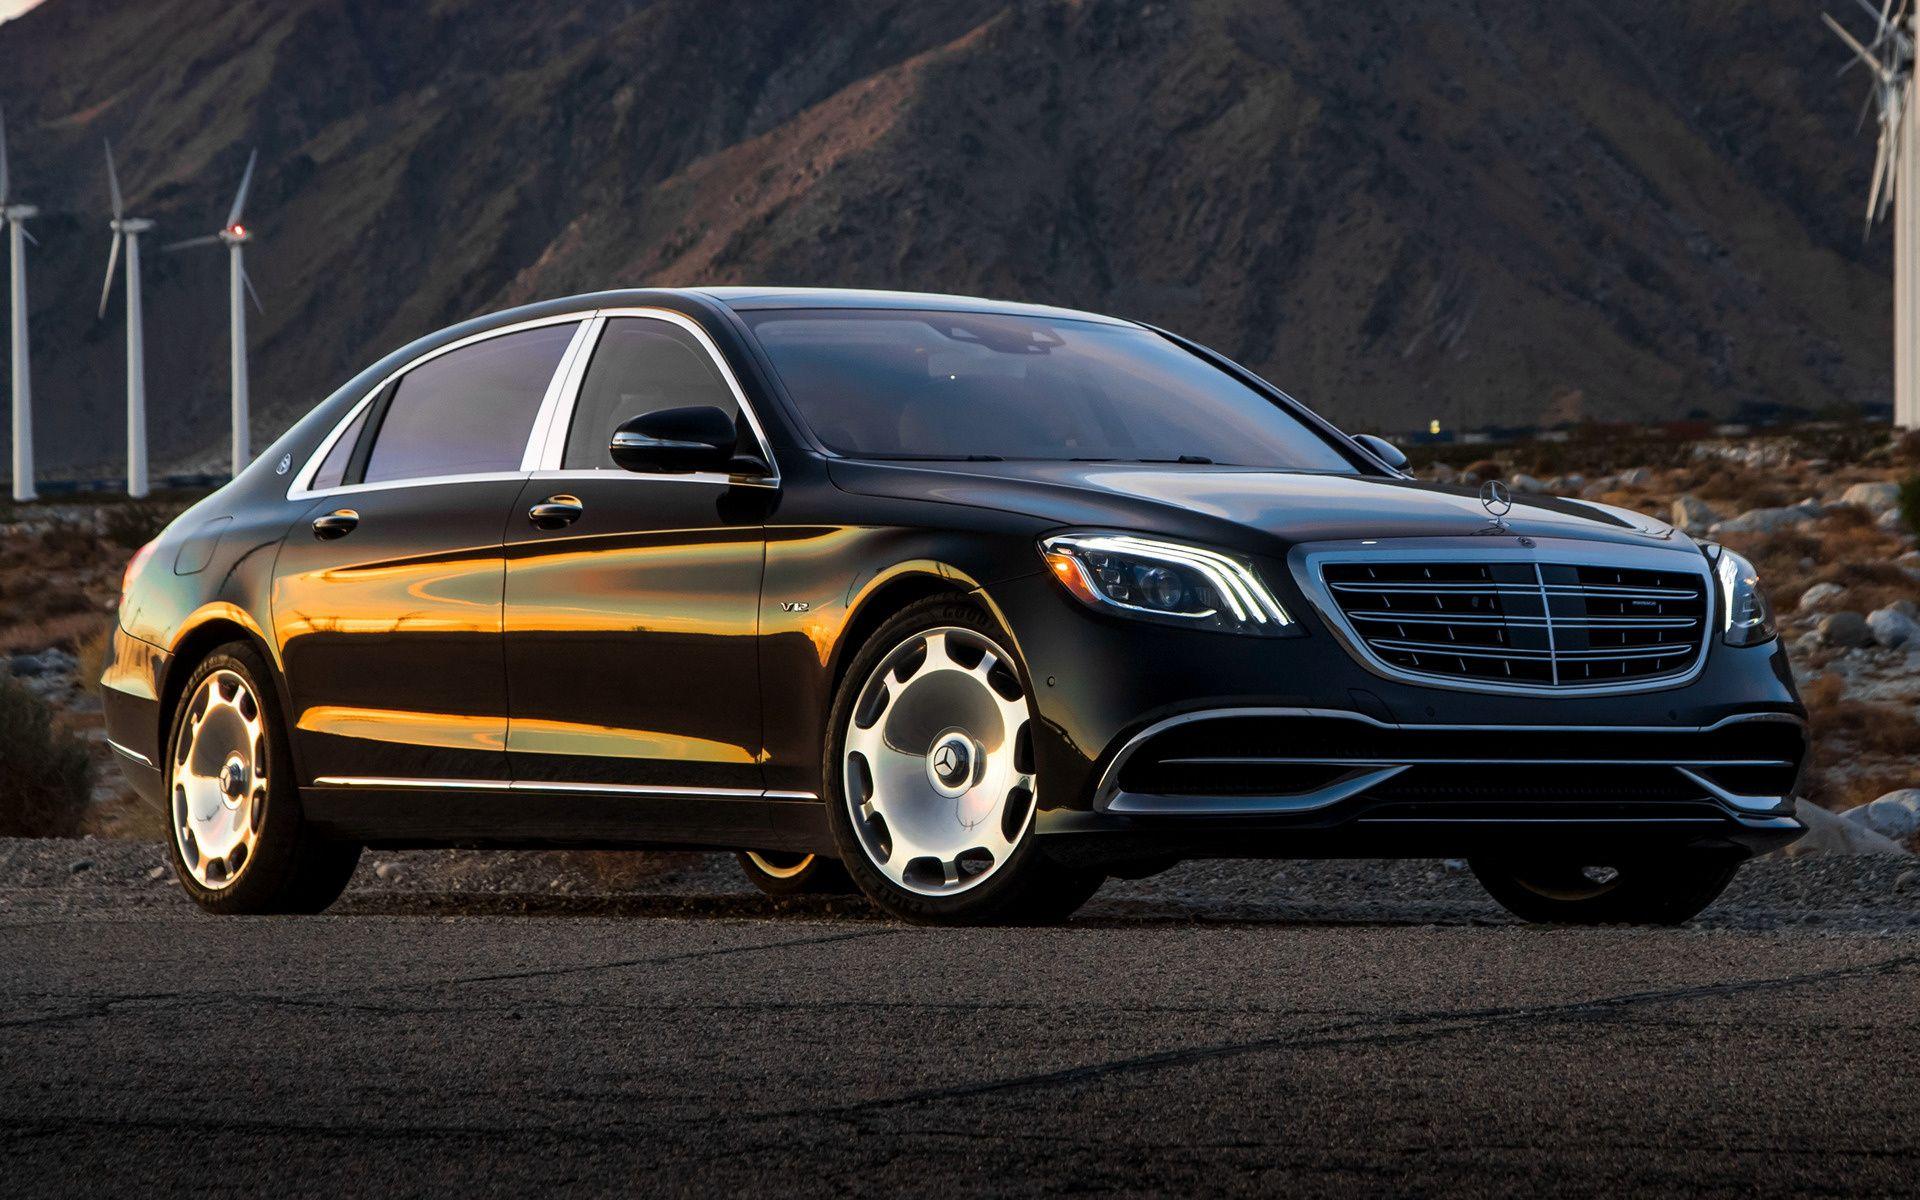 Mercedes Maybach S Class (2018) US Wallpaper And HD Image